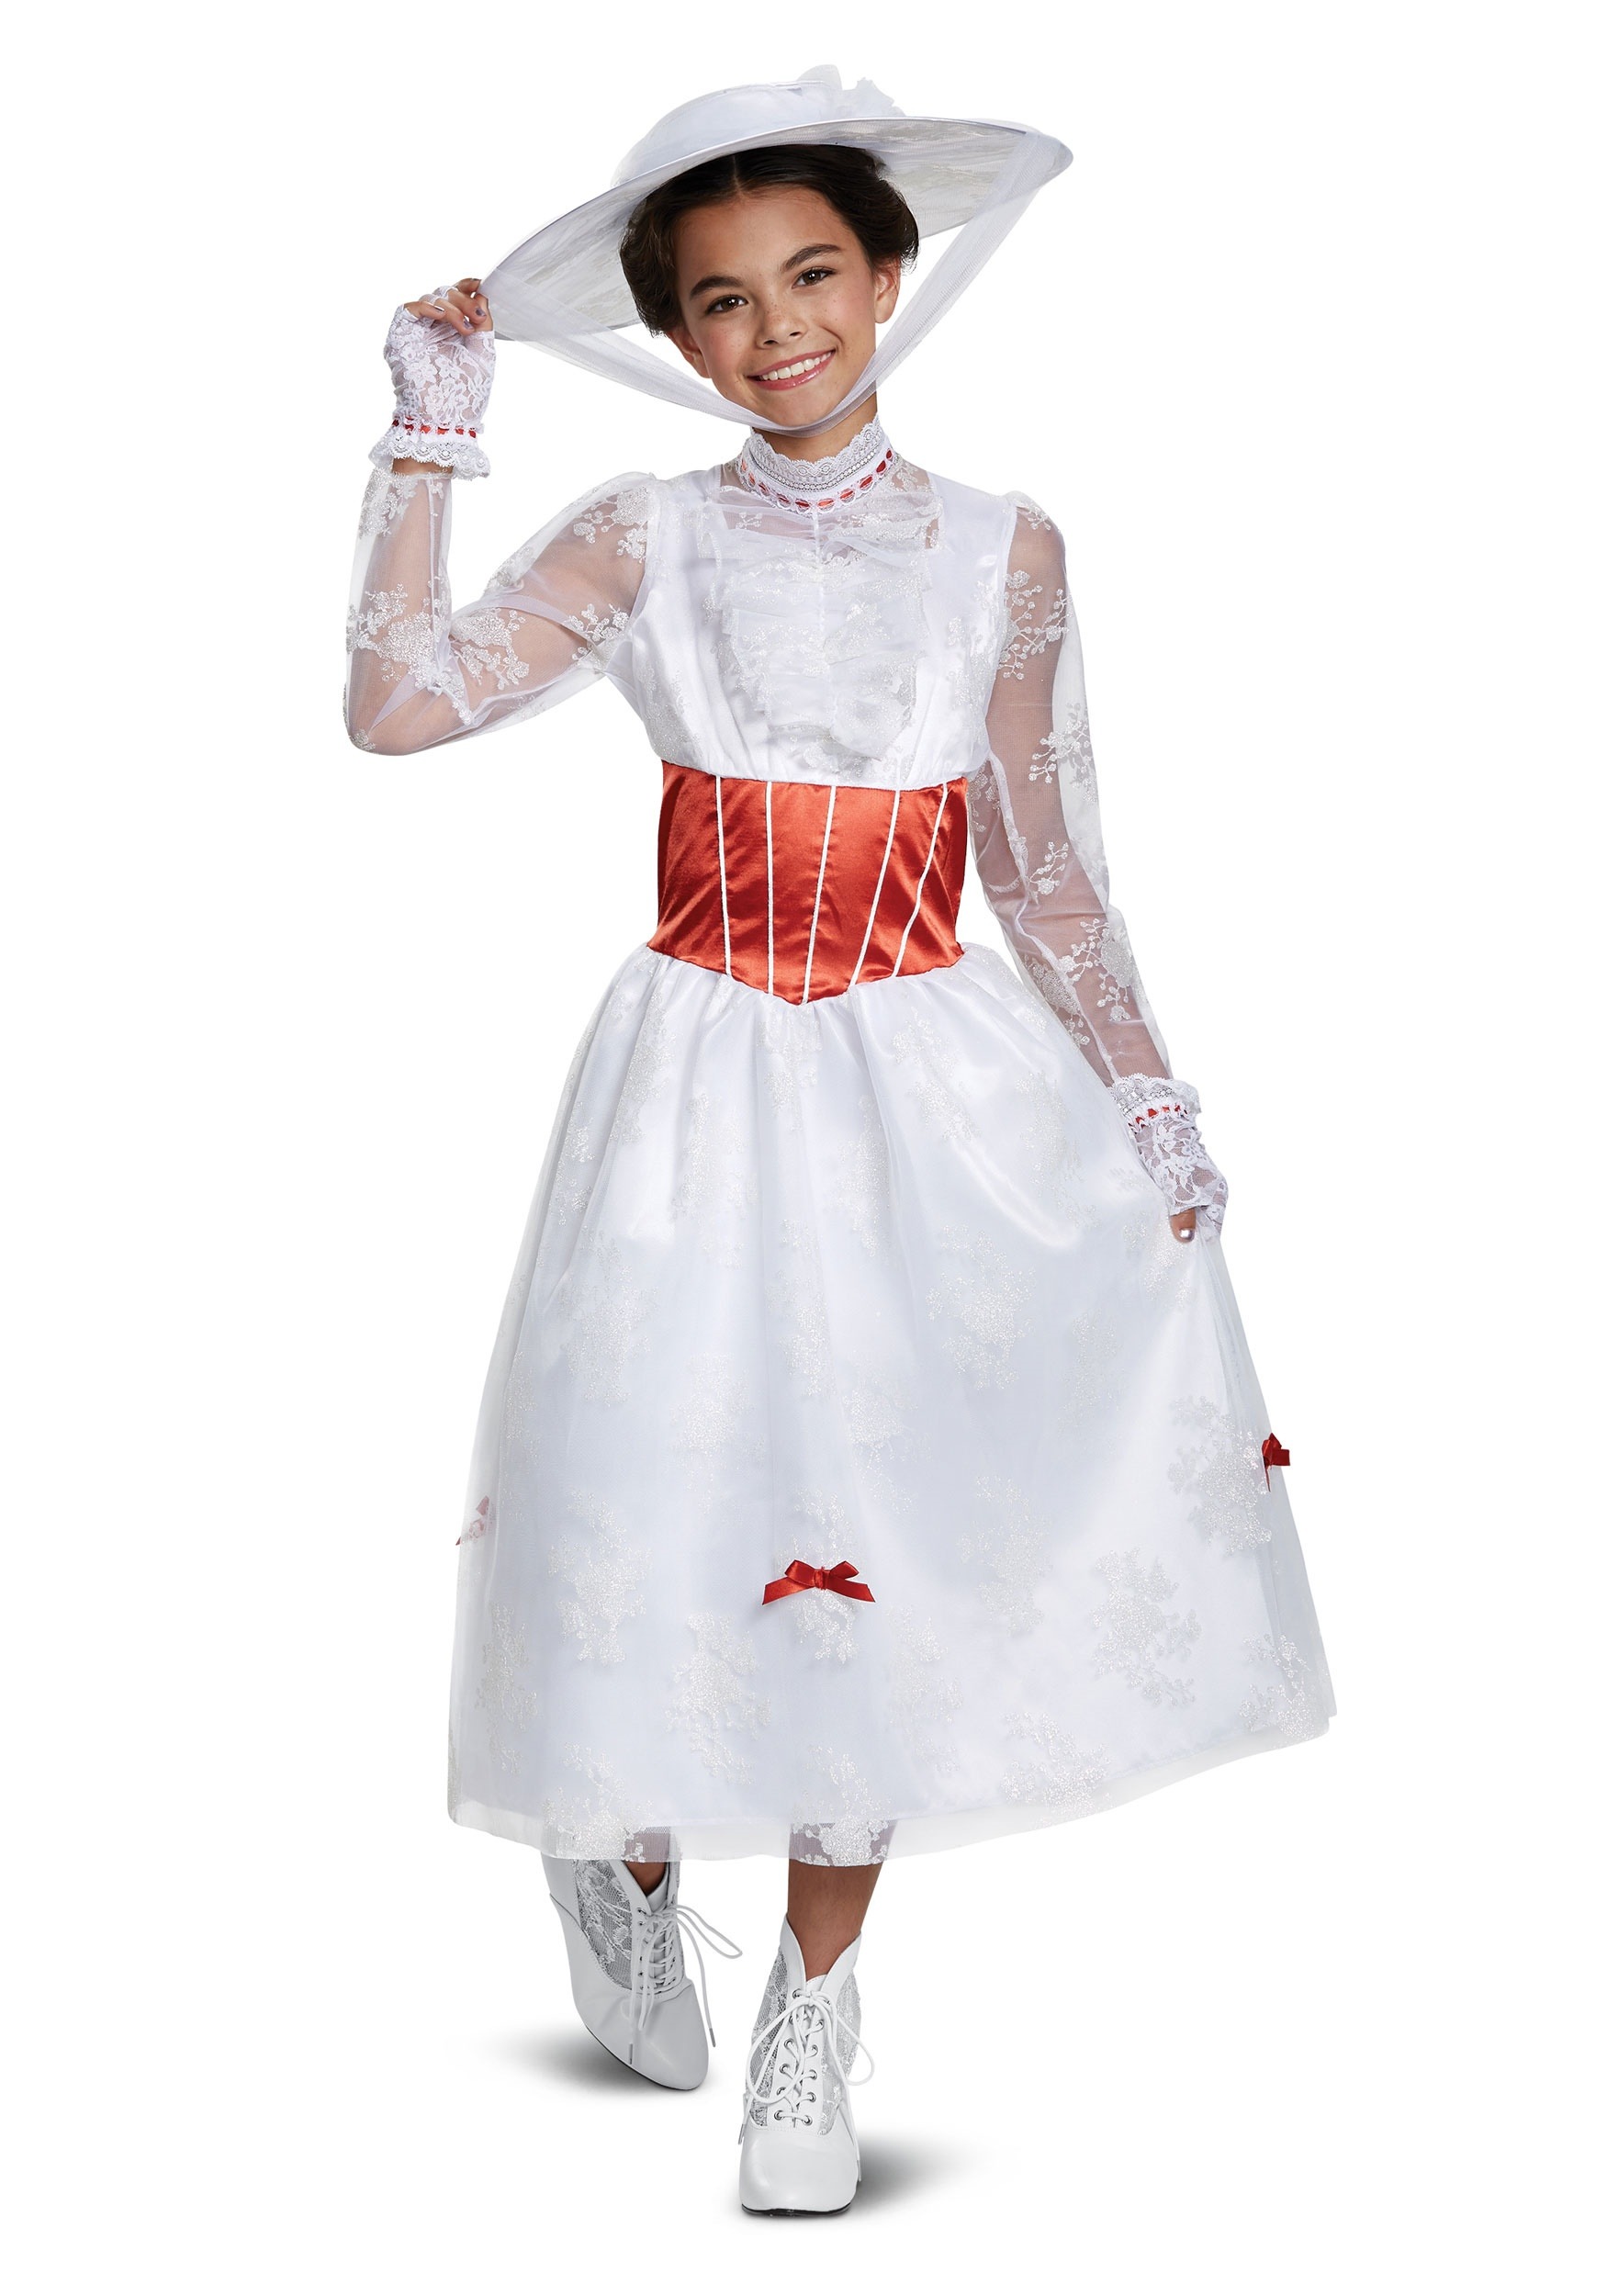 Kids Deluxe Mary Poppins Costume